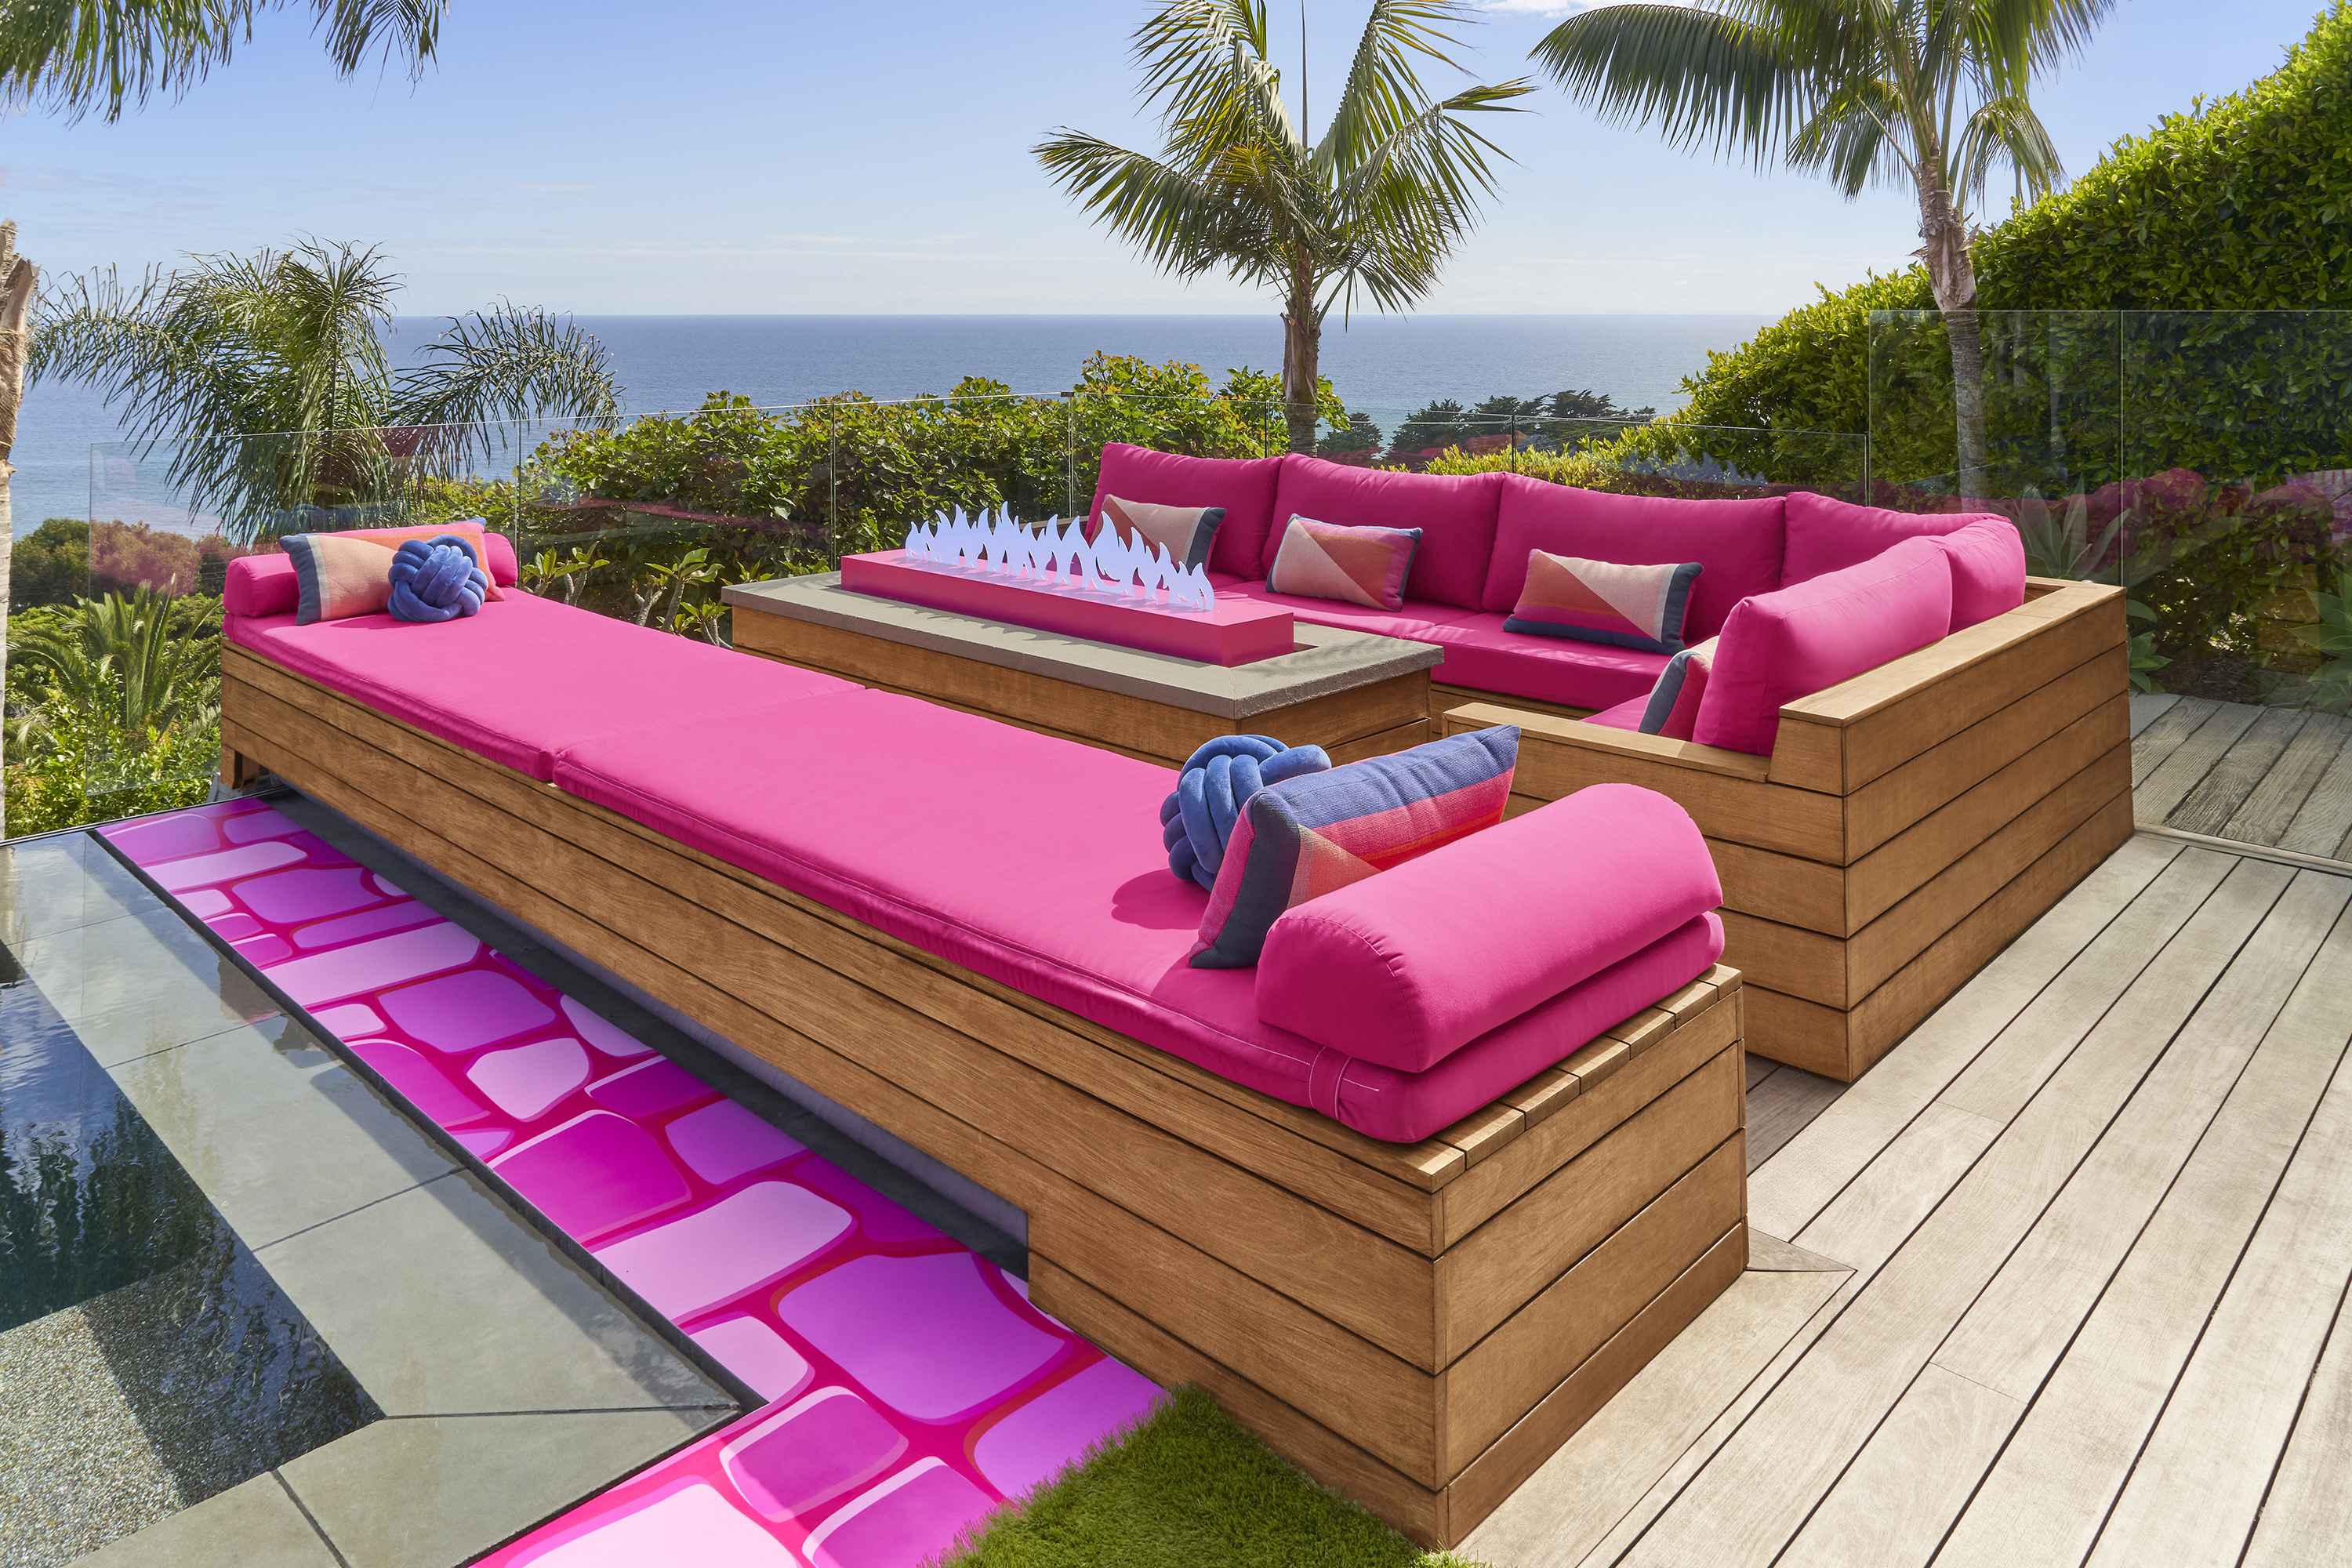 Two outdoor benches with pink cushions and fluffly pillows, with a Barbie-staged fireplace in the center.